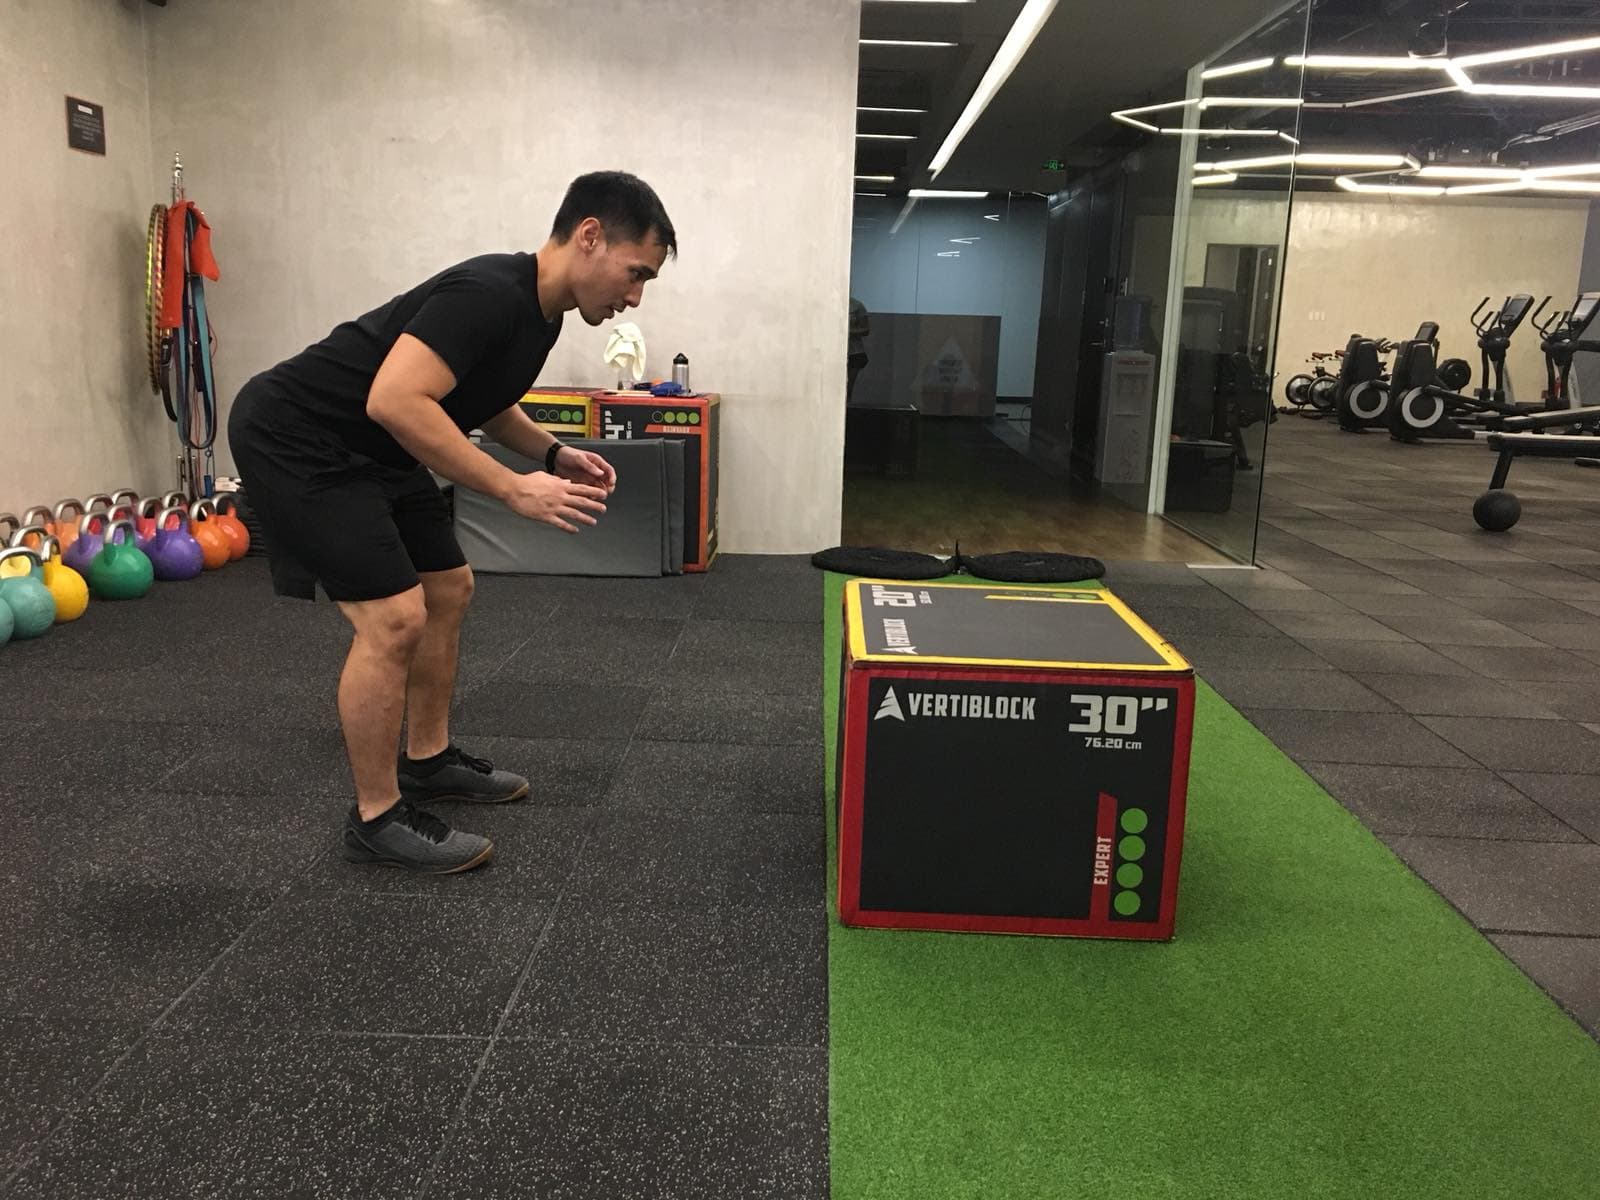 Exercises for the trail: When doing box jumps, your start position should look almost the same as your landing position